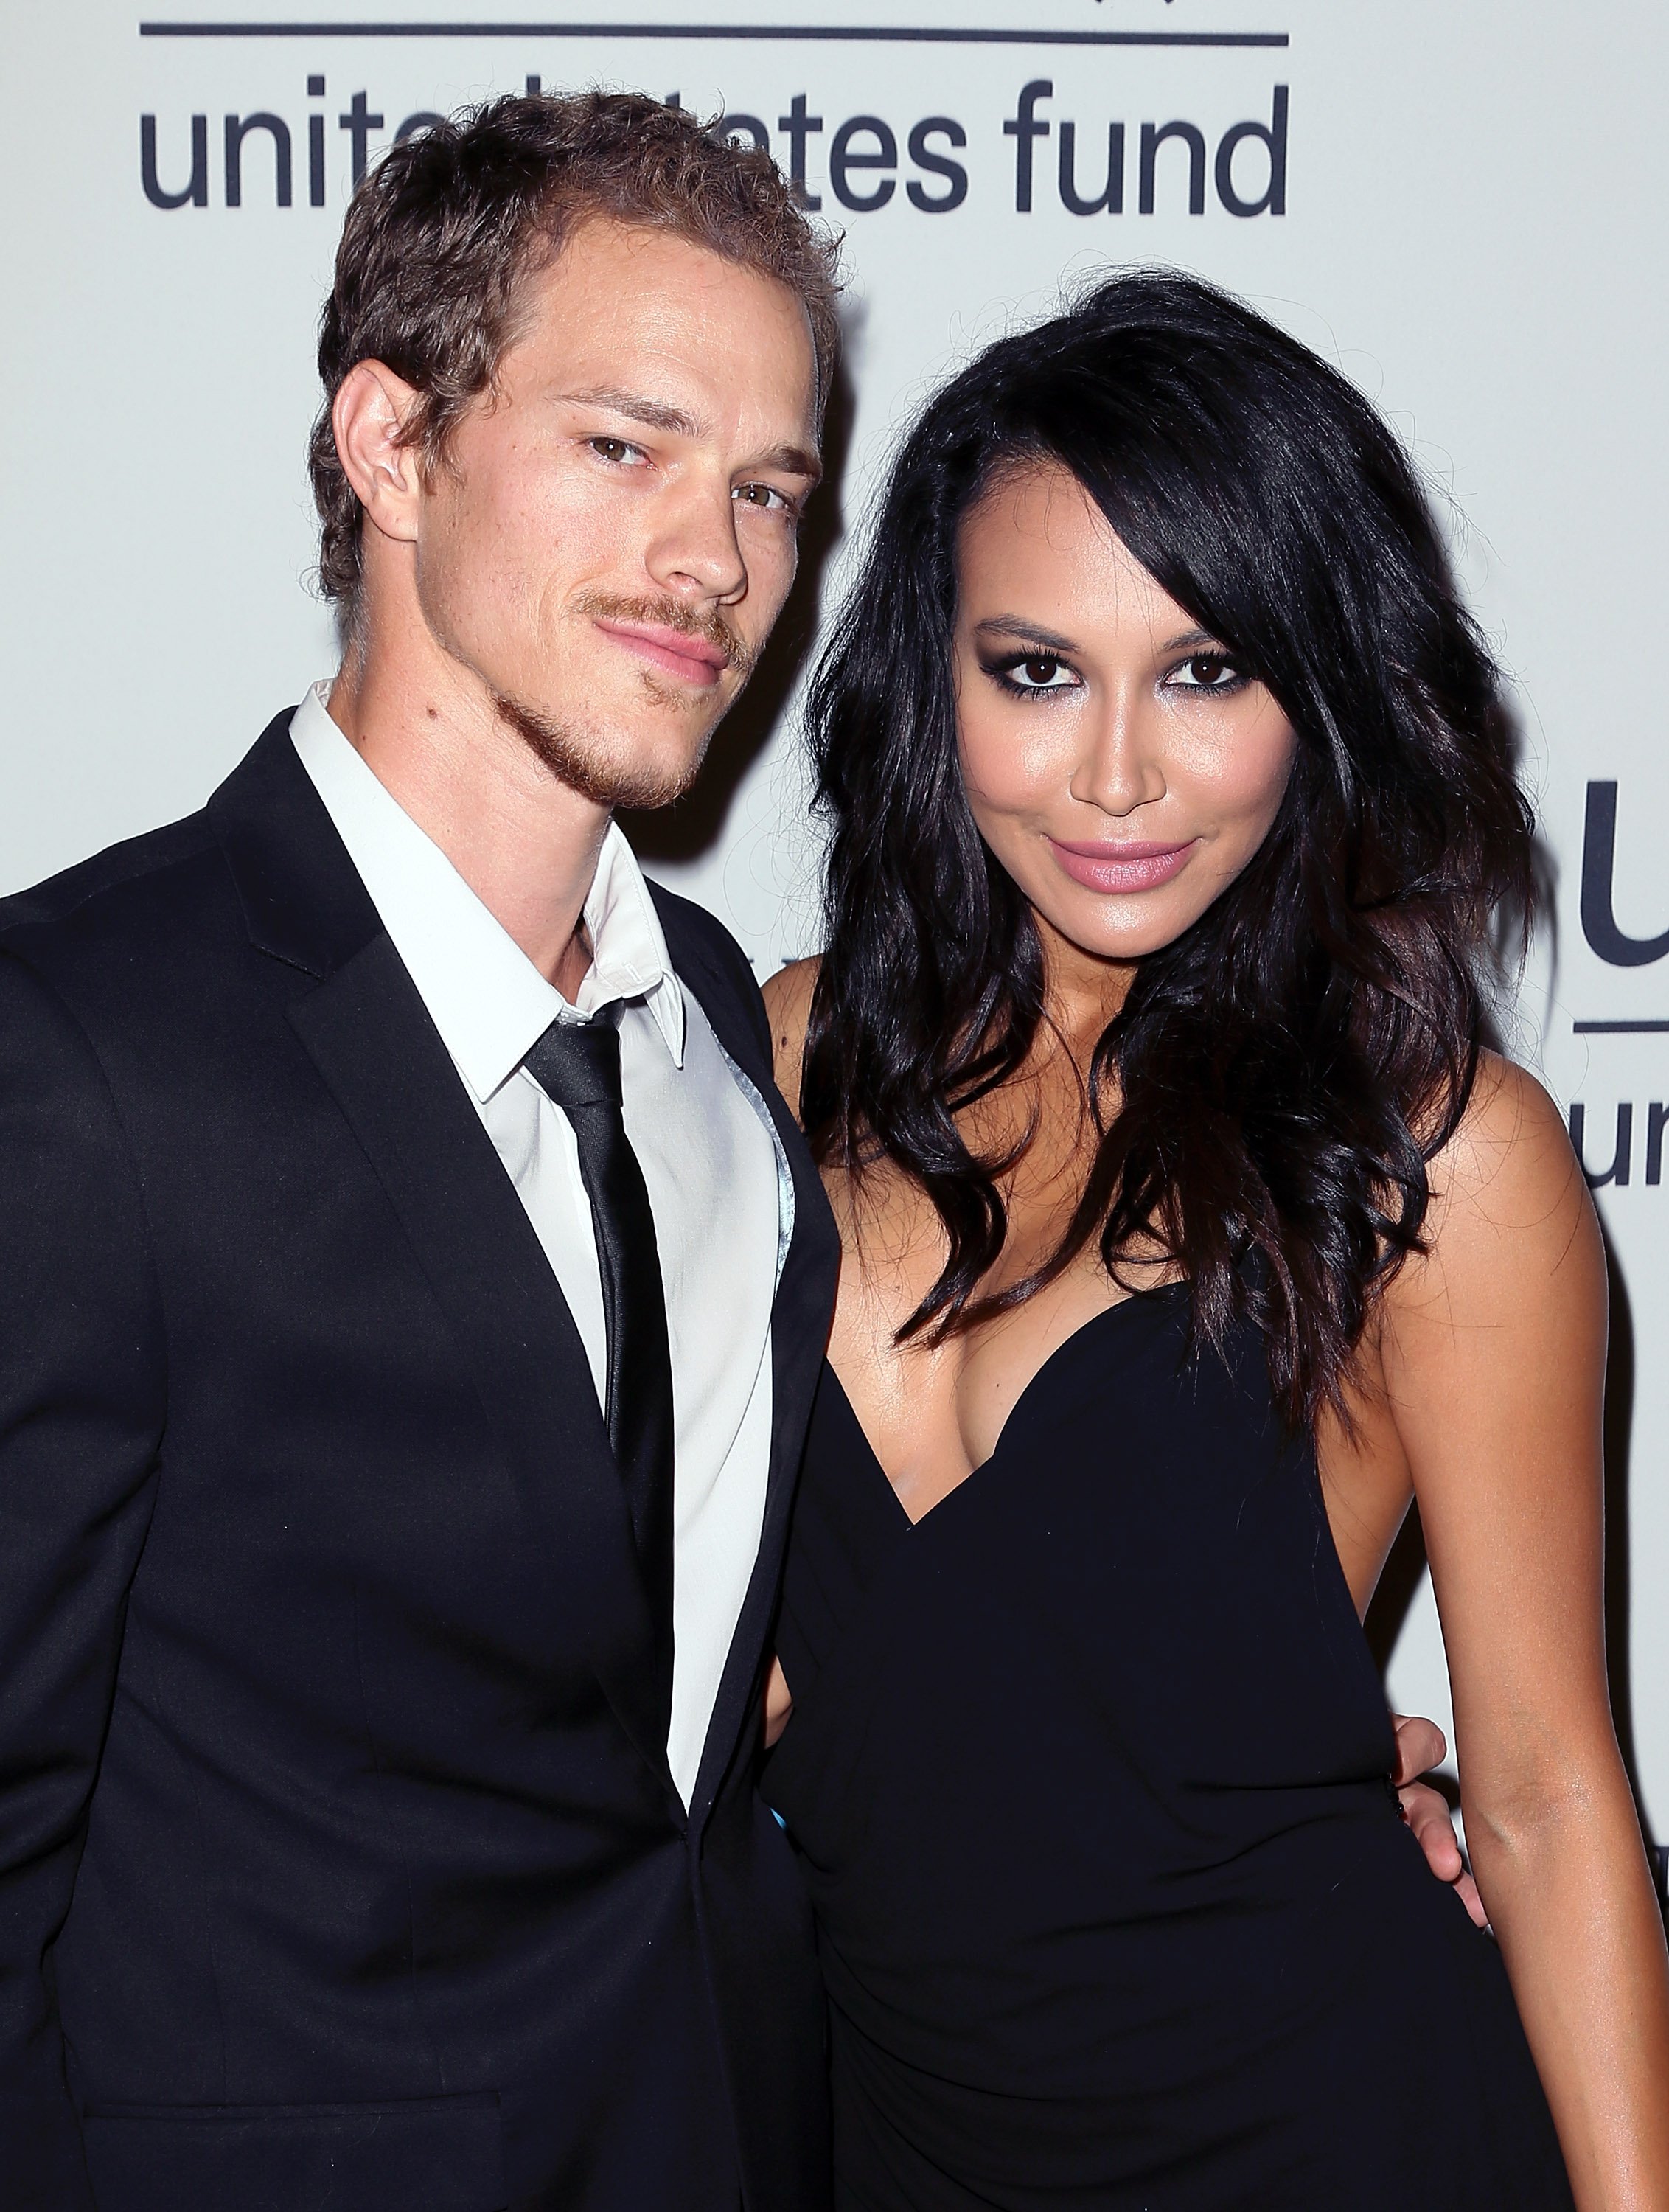 The late Naya Rivera and Ryan Dorsey pictured at the UNICEF's Next Generation's 2nd Annual UNICEF Masquerade Ball, 2014 in Los Angeles, California. | Photo: Getty Images